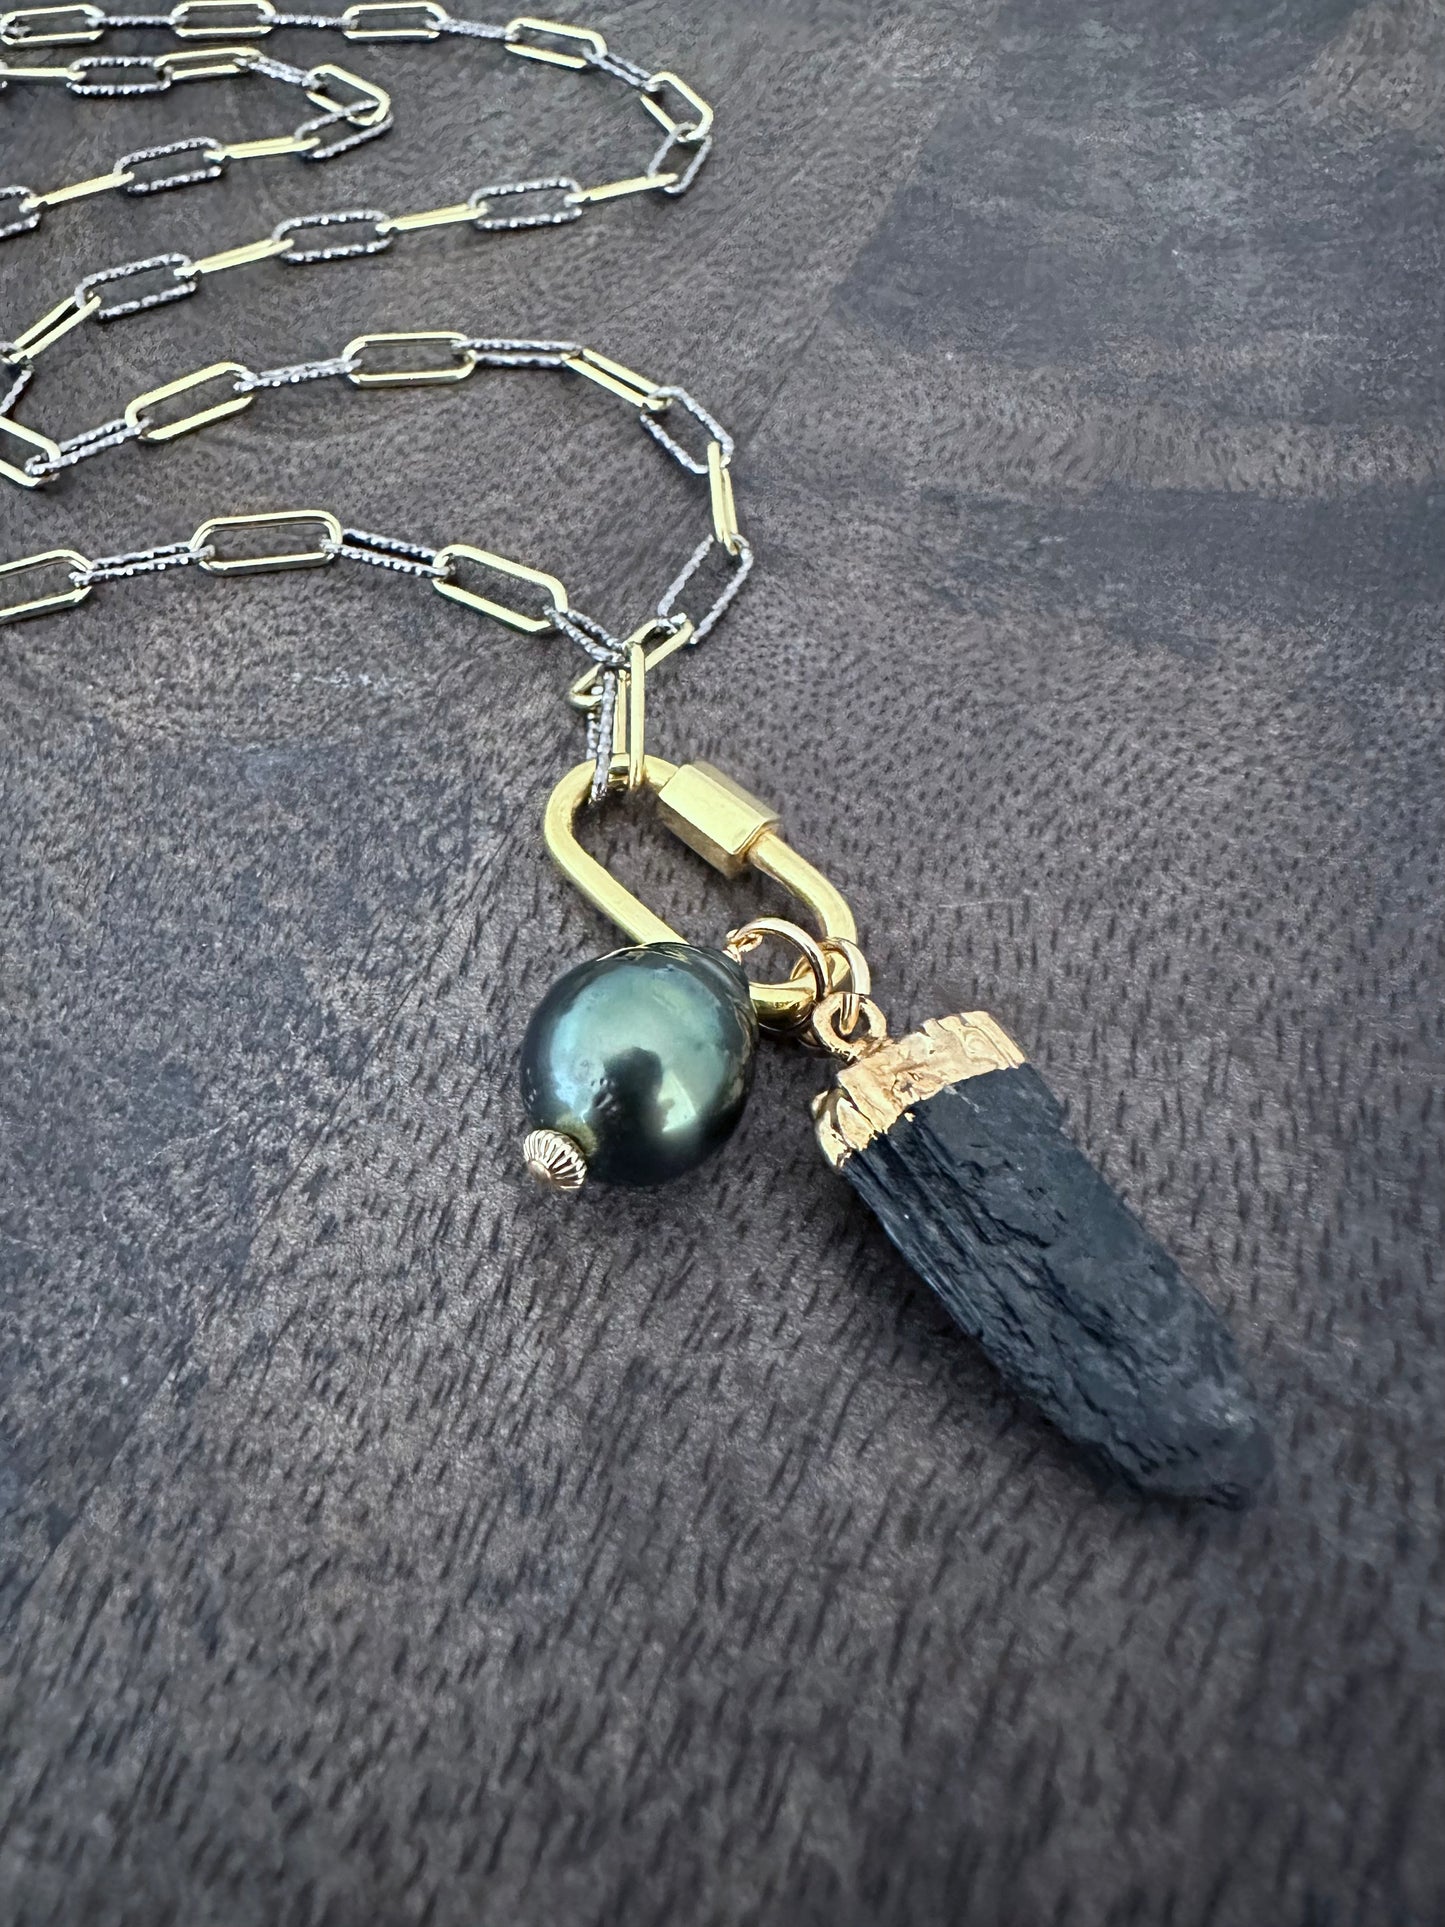 a close up of a long necklace wth mixed metal chain with a gold carabeaner and a large black pearl and a raw black tourmaline pendant on a wooden background